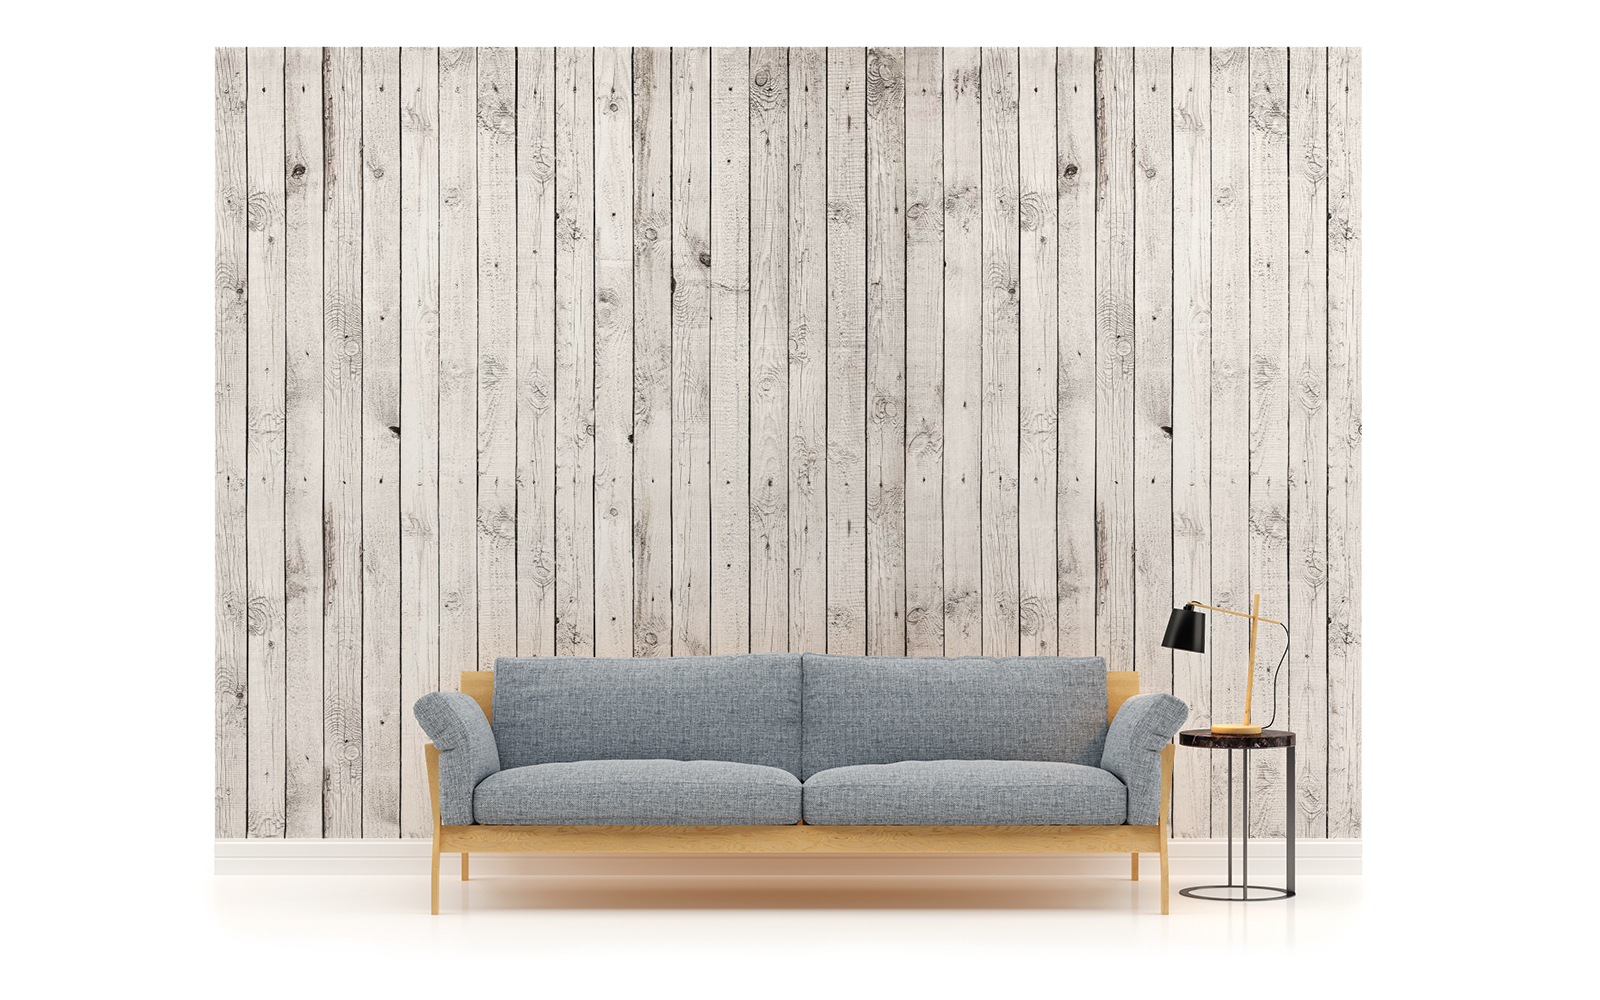 About Wood Planks Texture Photo Wallpaper Wall Mural Room 1013p